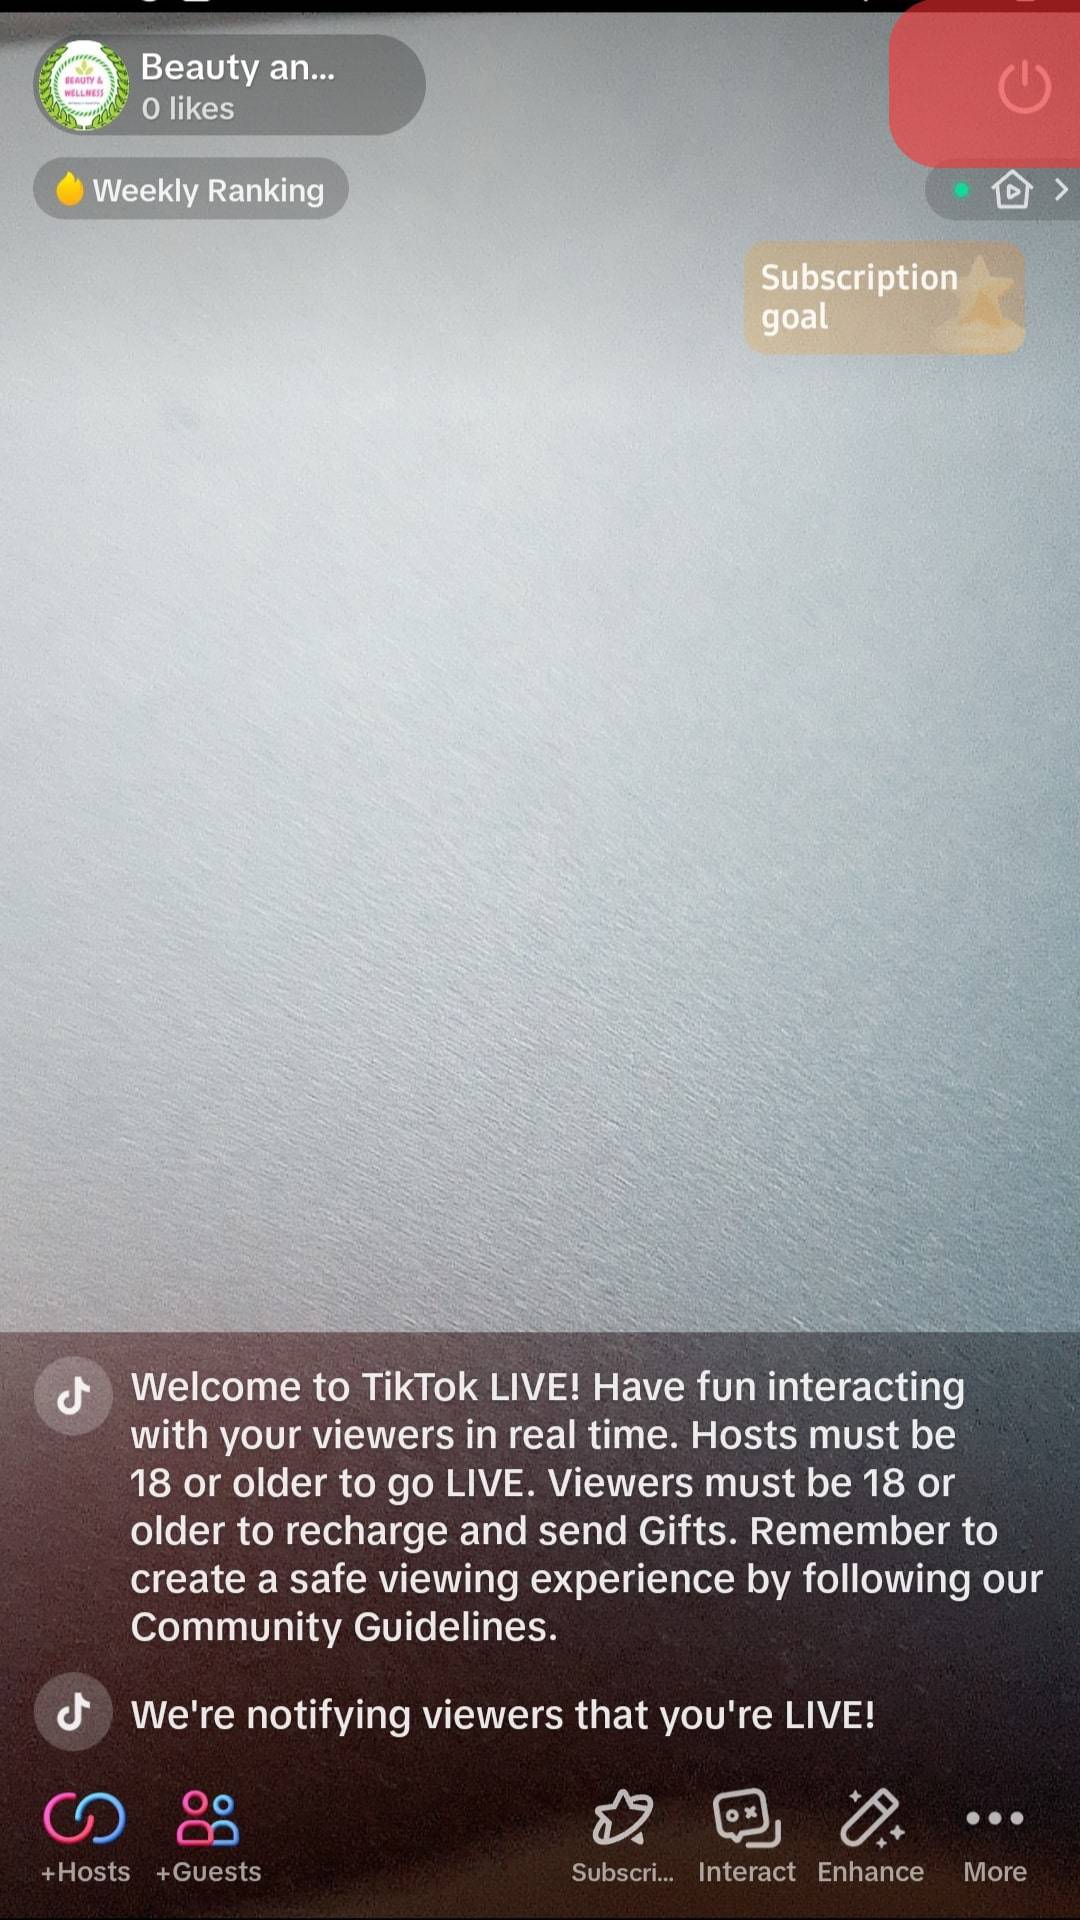 Click The Turn Off Button To End The Live